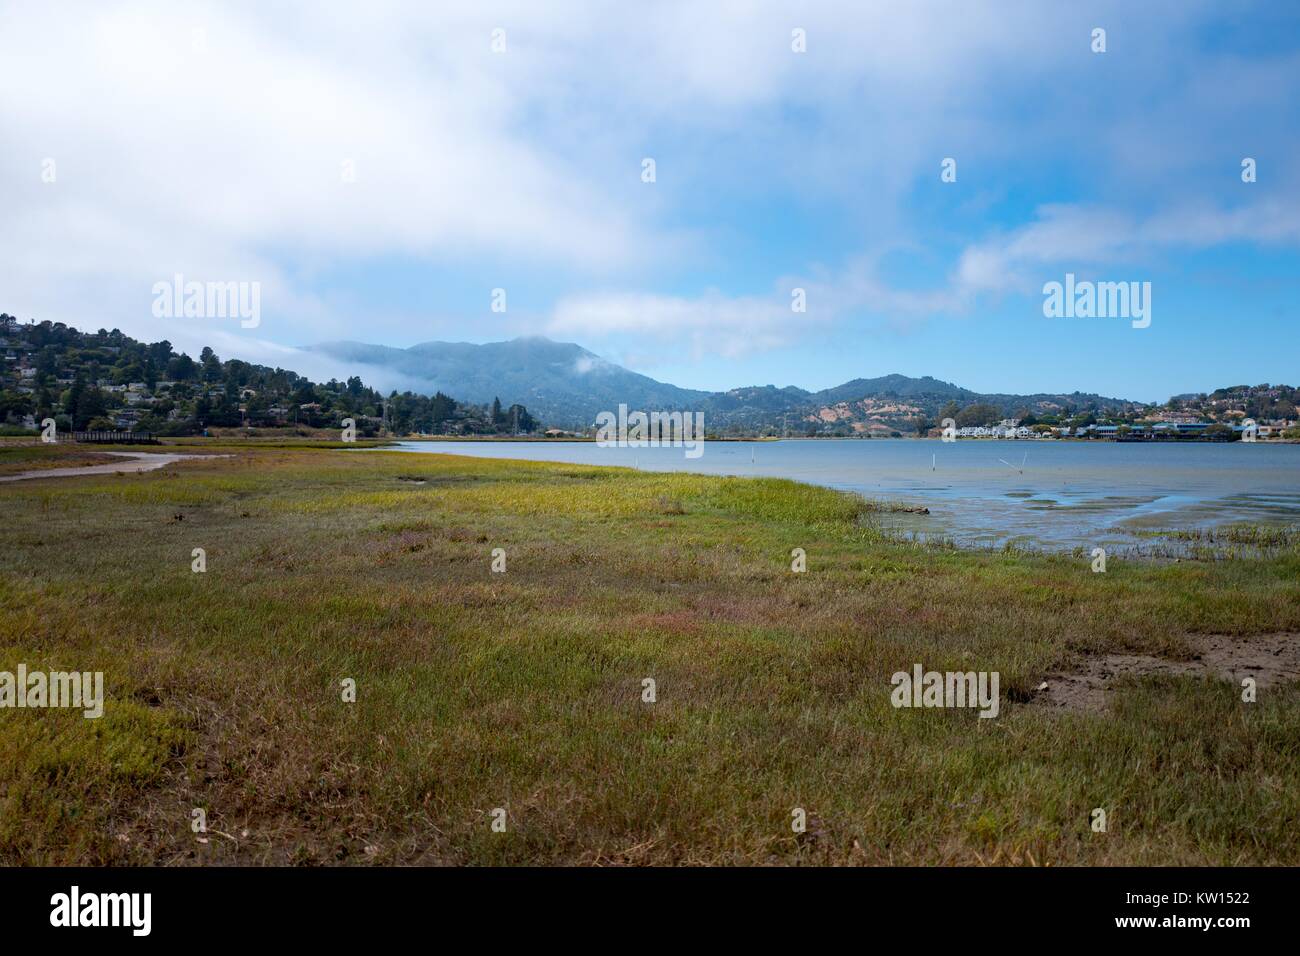 Richardson Bay wetland areas, with Mount Tamalpais visible in the background, Sausalito, California, July, 2016. Stock Photo